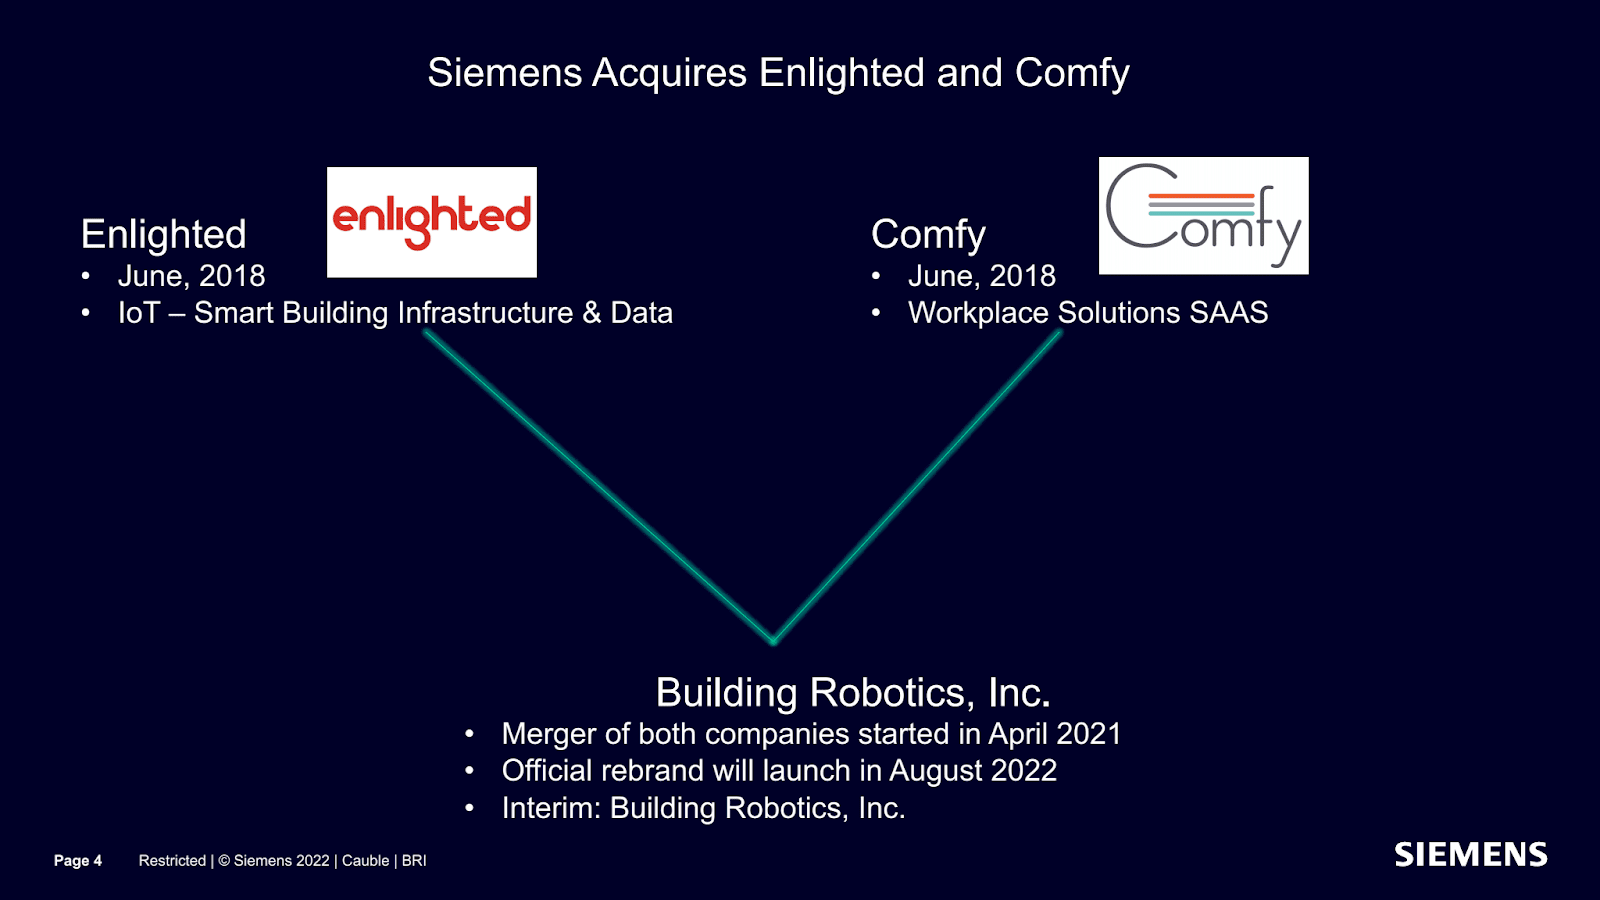 Siemens acquires Enlighted and Comfy